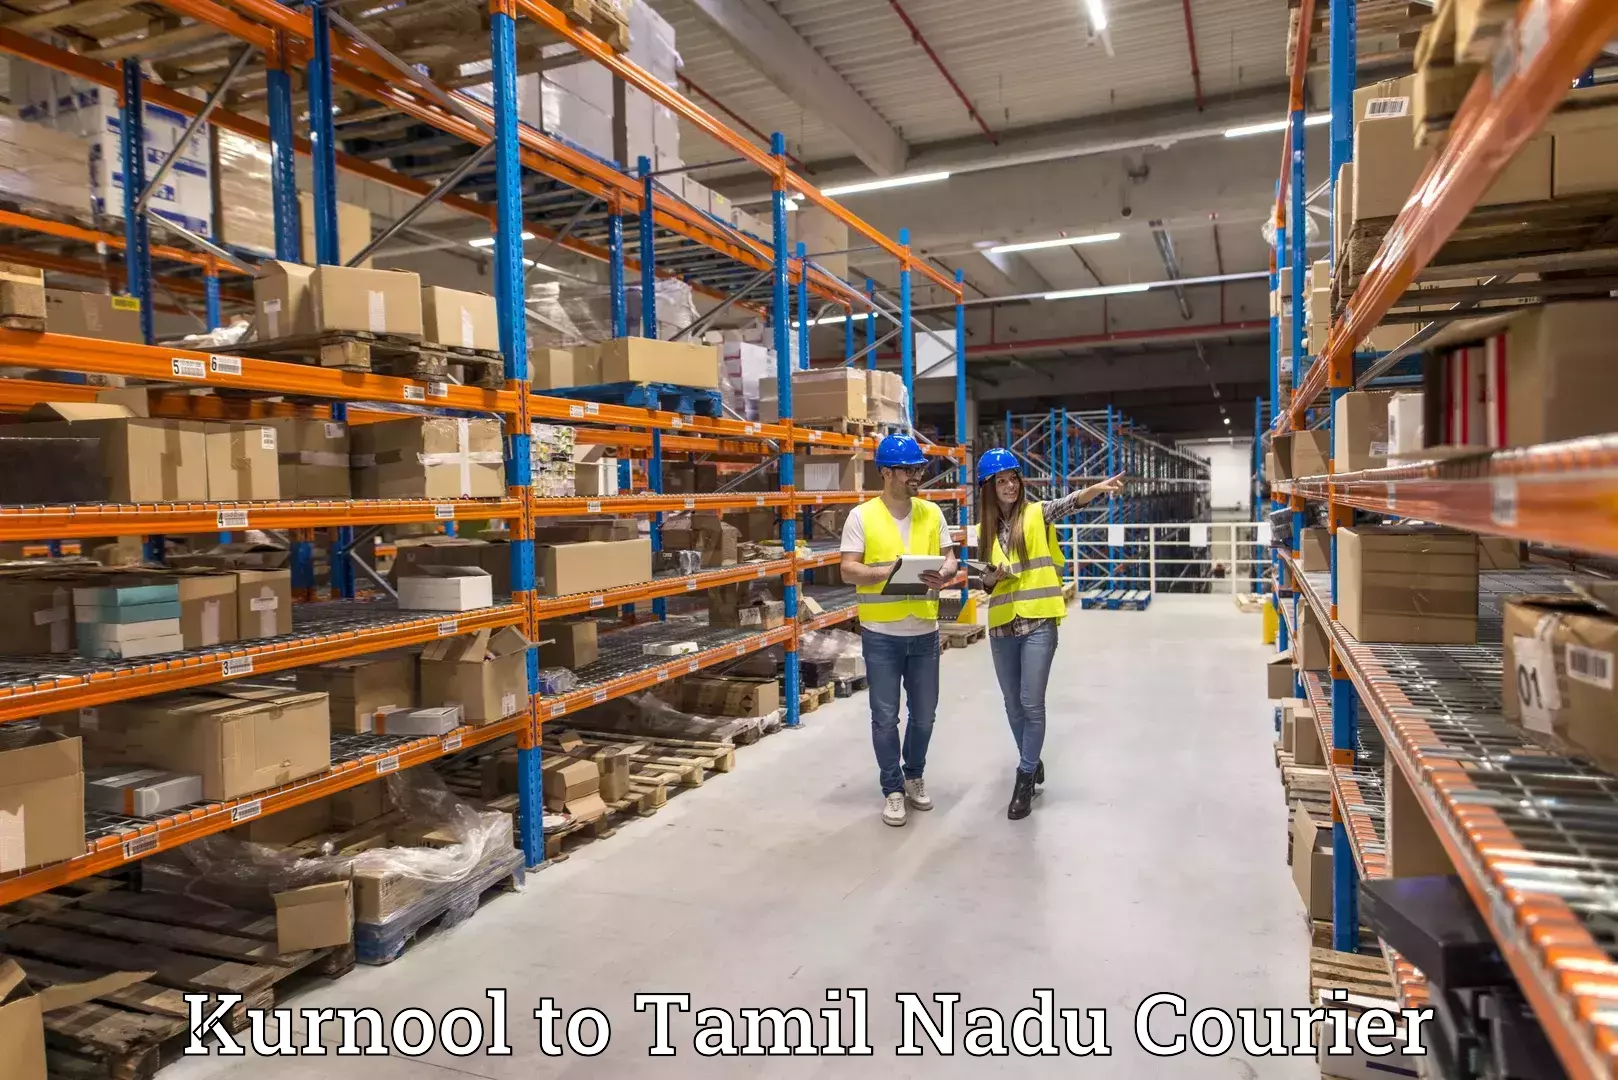 Express mail solutions Kurnool to Ennore Port Chennai